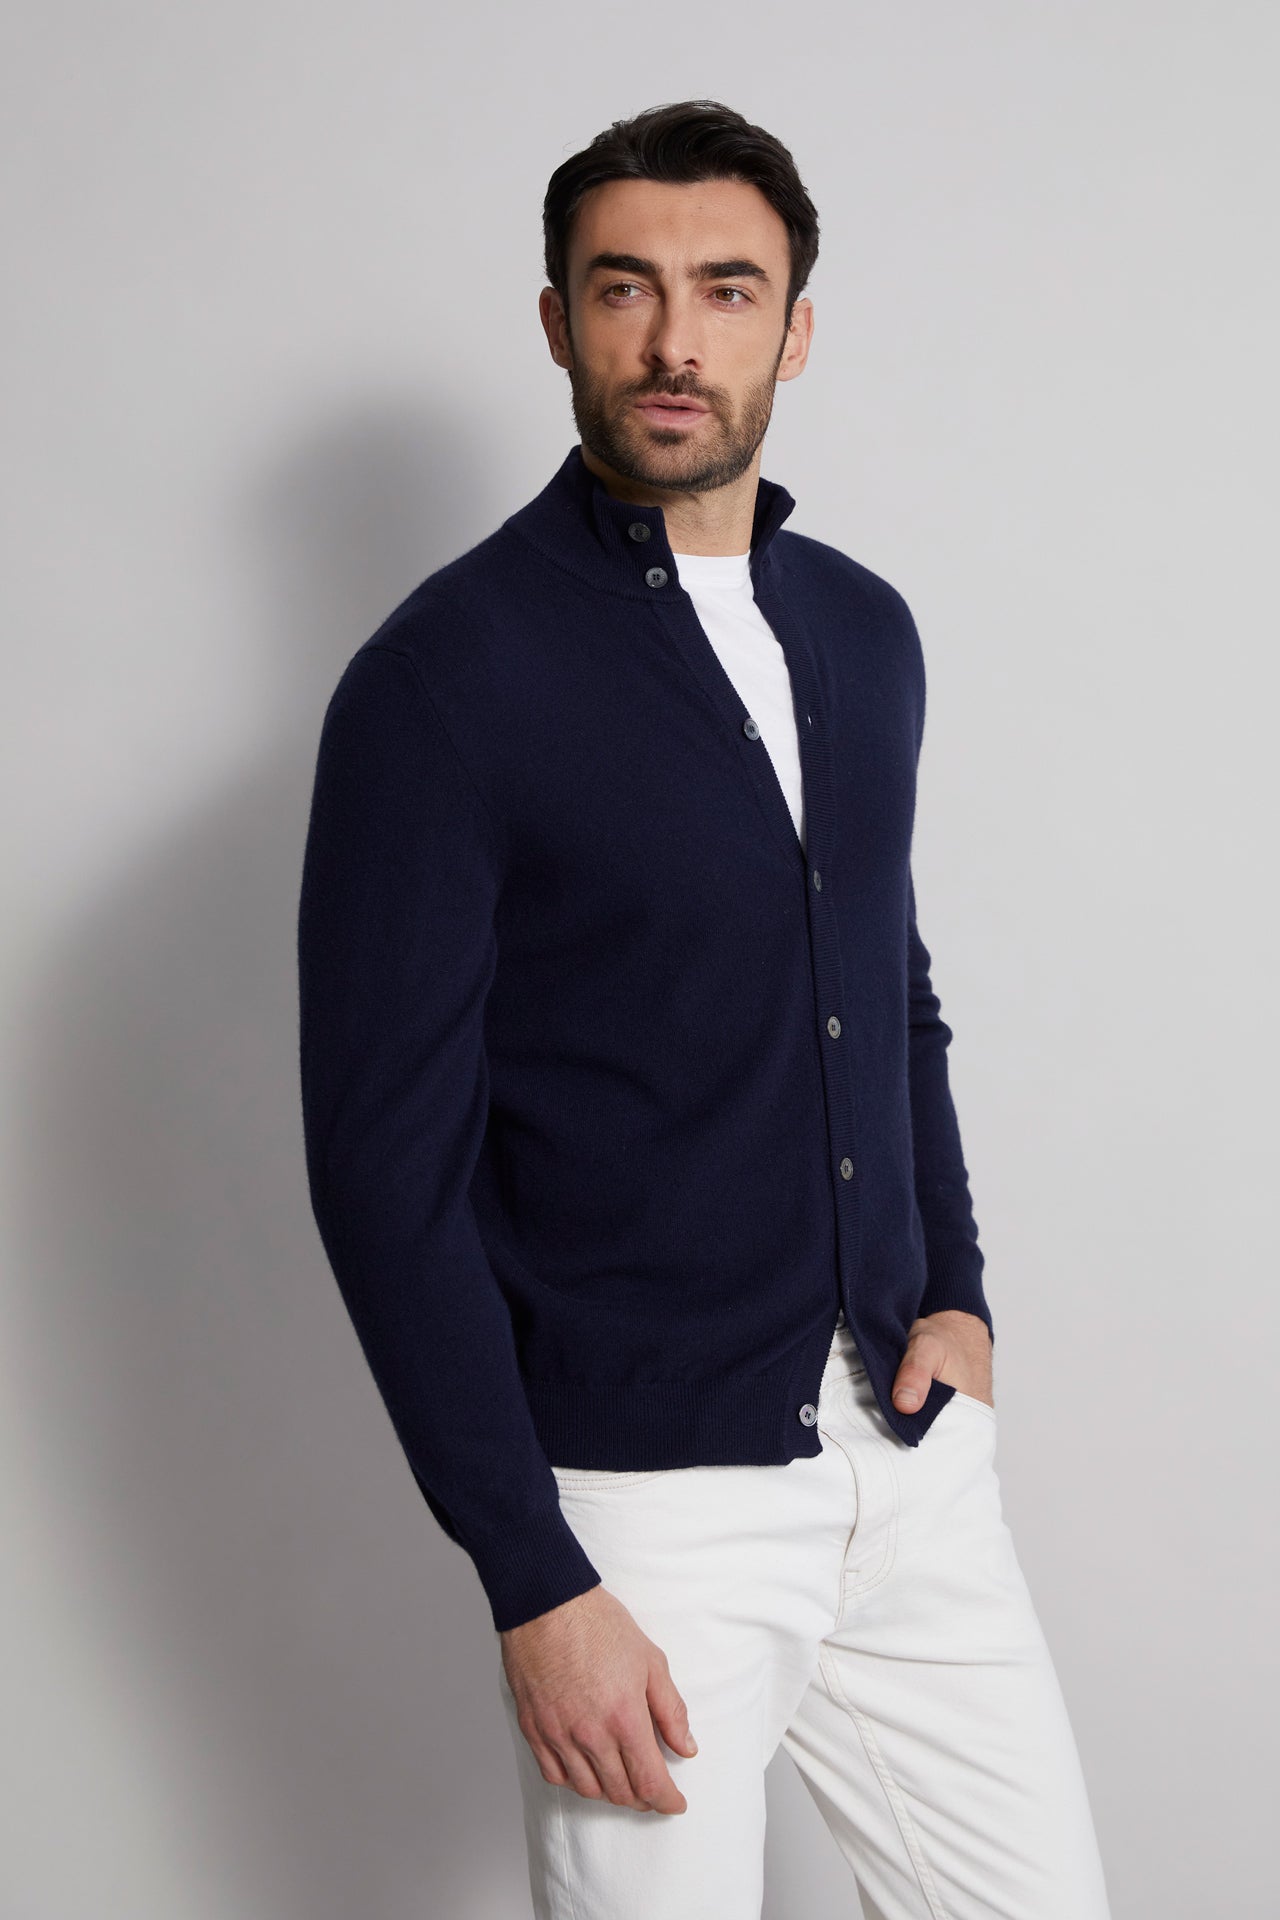 Favonius fully buttoned cashmere sweater in iconic colors